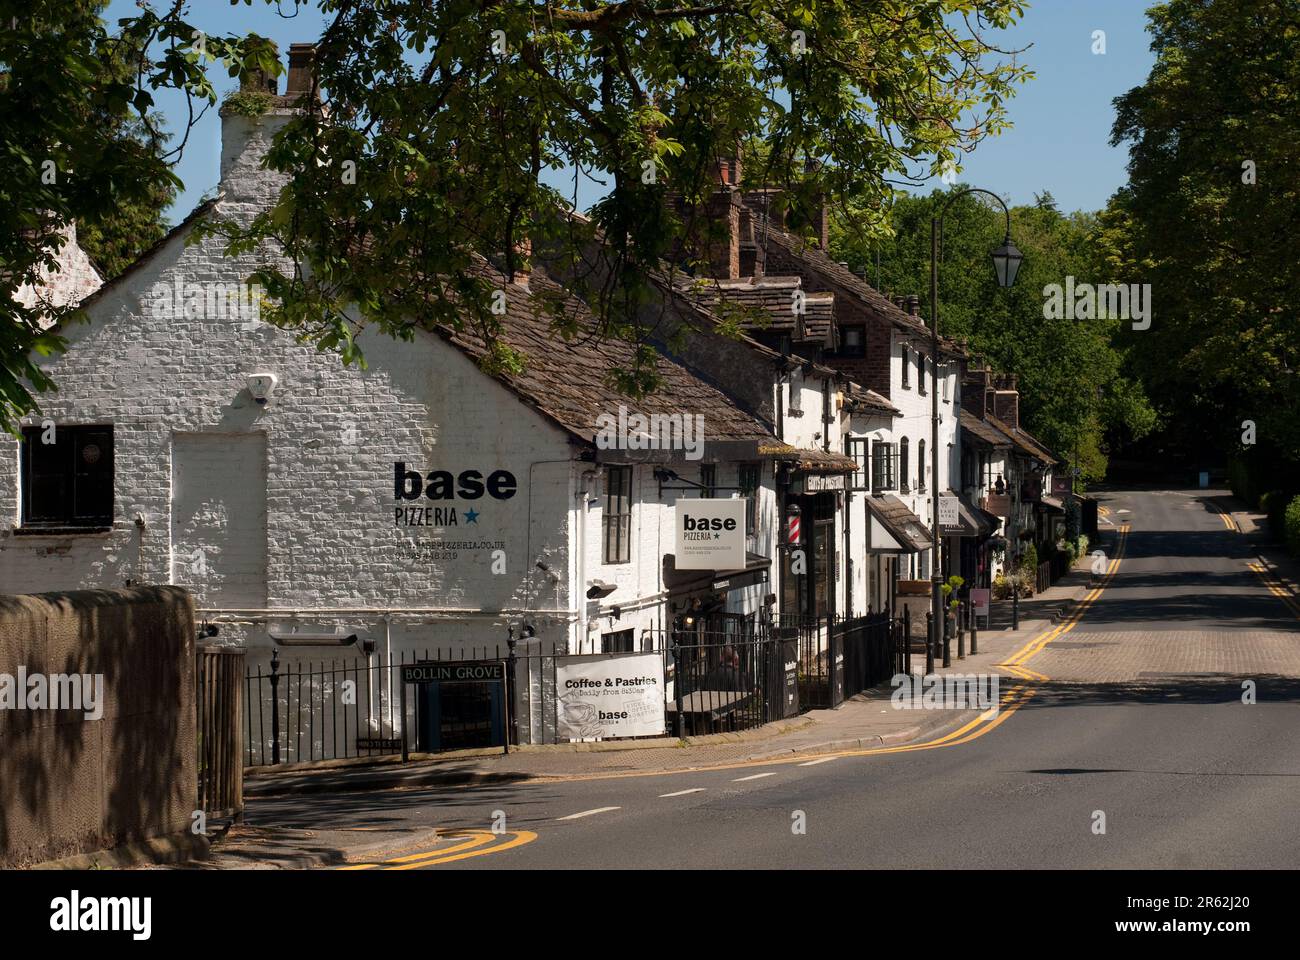 The shops and cafes on New Road Preatbury, Cheshire Stock Photo